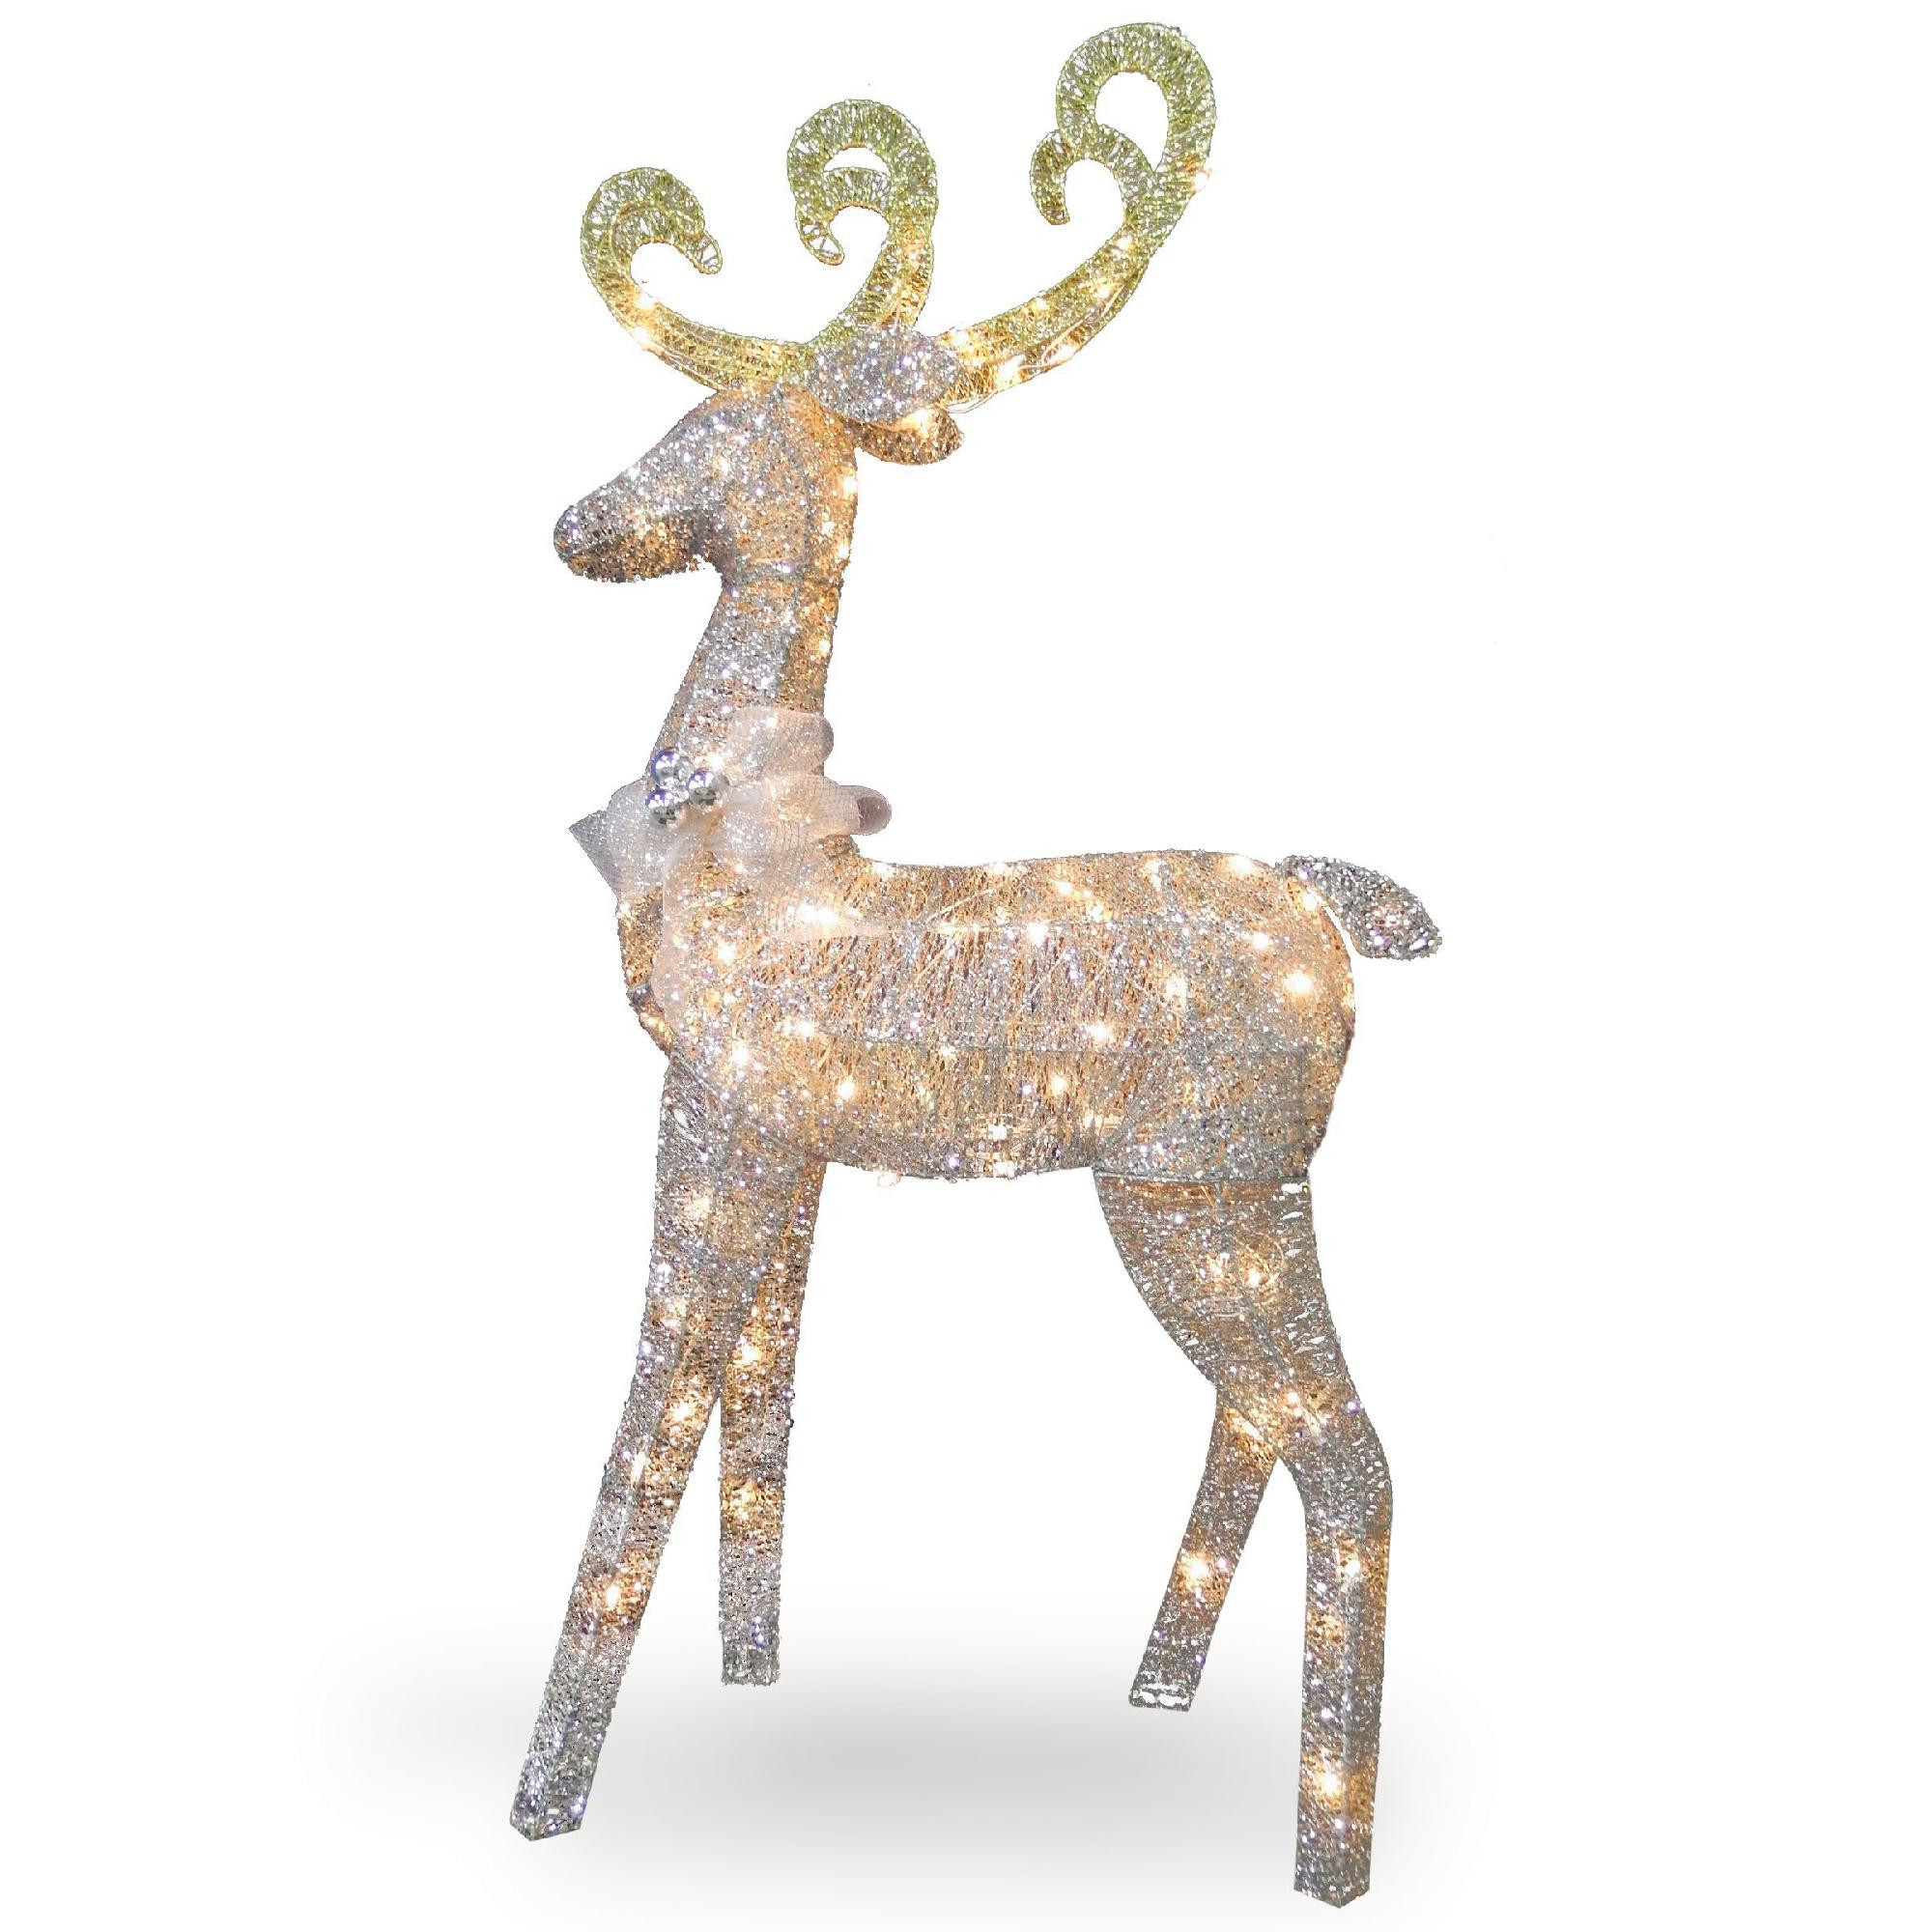 Outdoor Christmas Reindeer
 National Tree pany 60" Reindeer Decoration with Clear